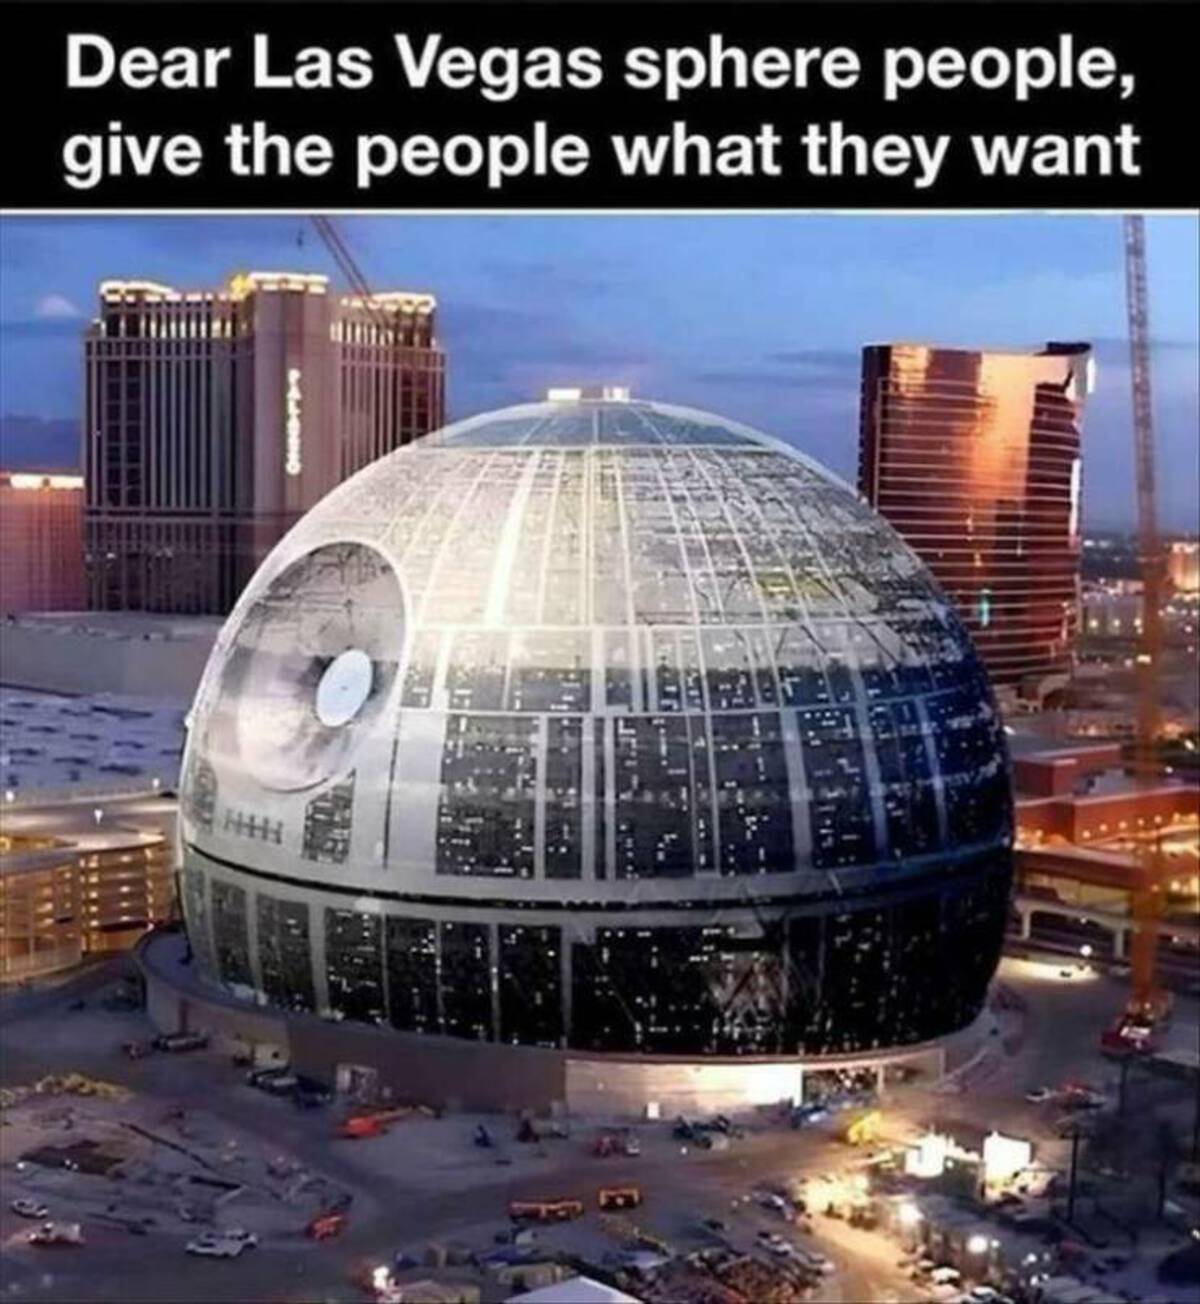 star wars las vegas sphere - Dear Las Vegas sphere people, give the people what they want Hhh